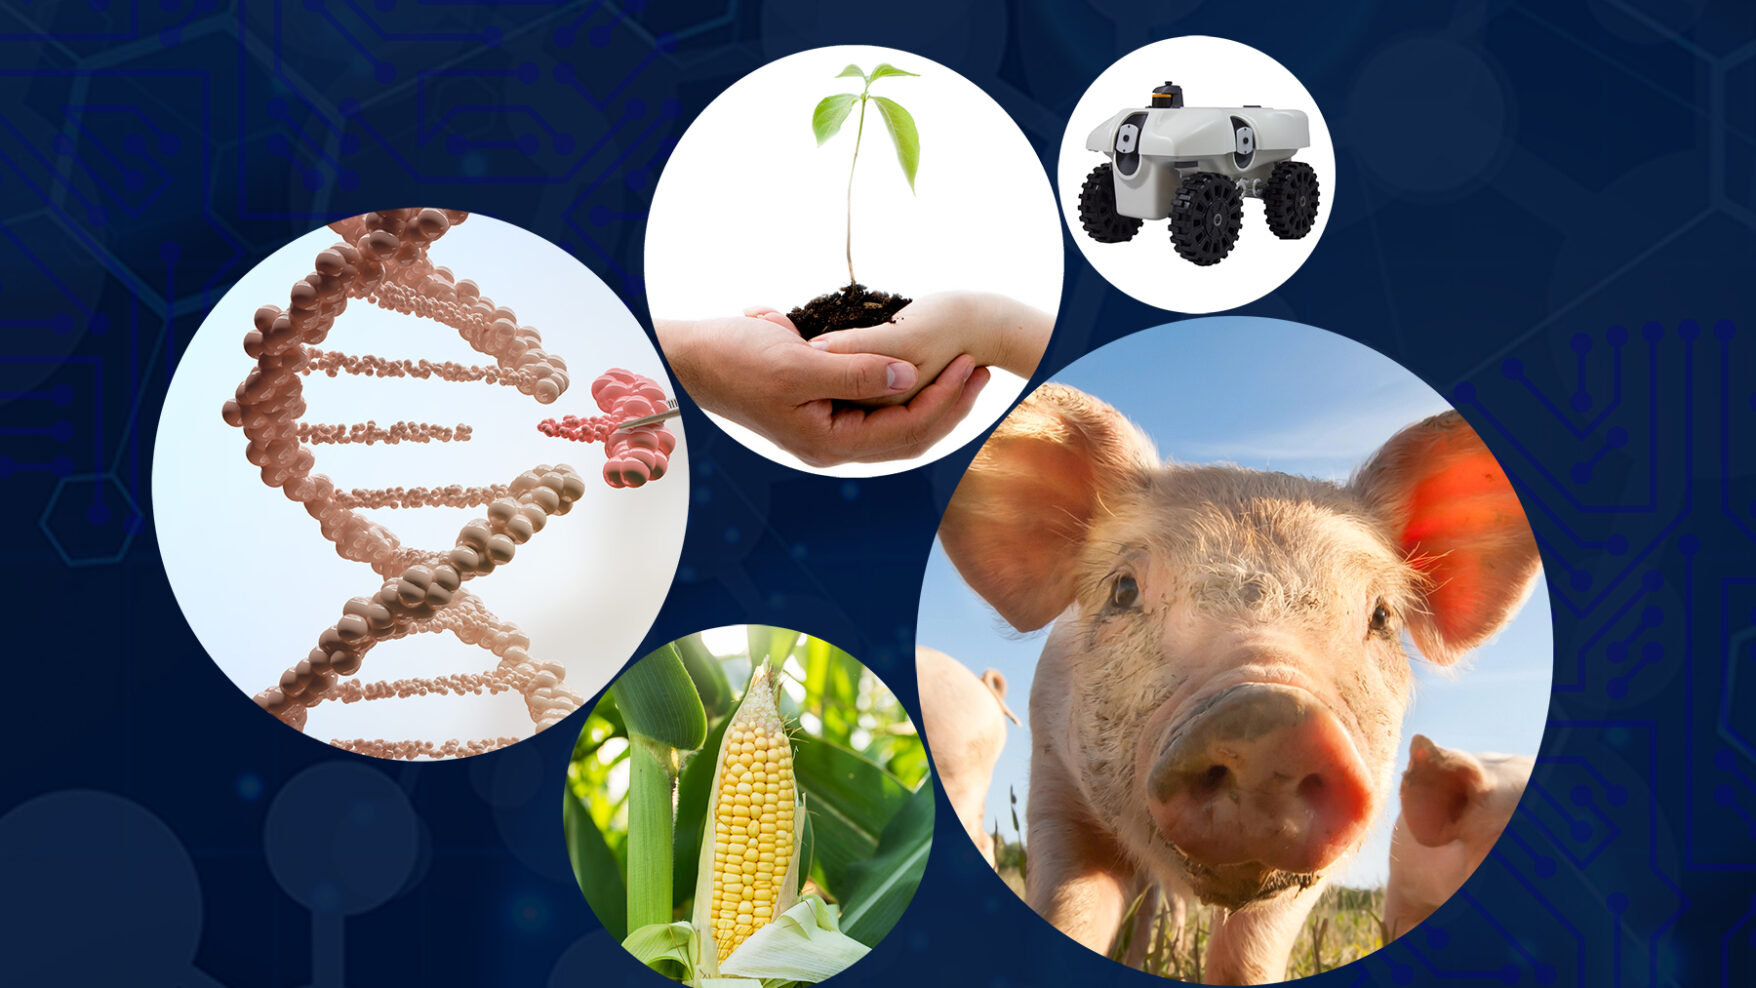 Multiple circles, each with a different aspect of CDA are clustered together on top of a blue textured background. The circles include a pig, some corn, a farming robot, hands holding a plant and a DNA strand being manipulated.